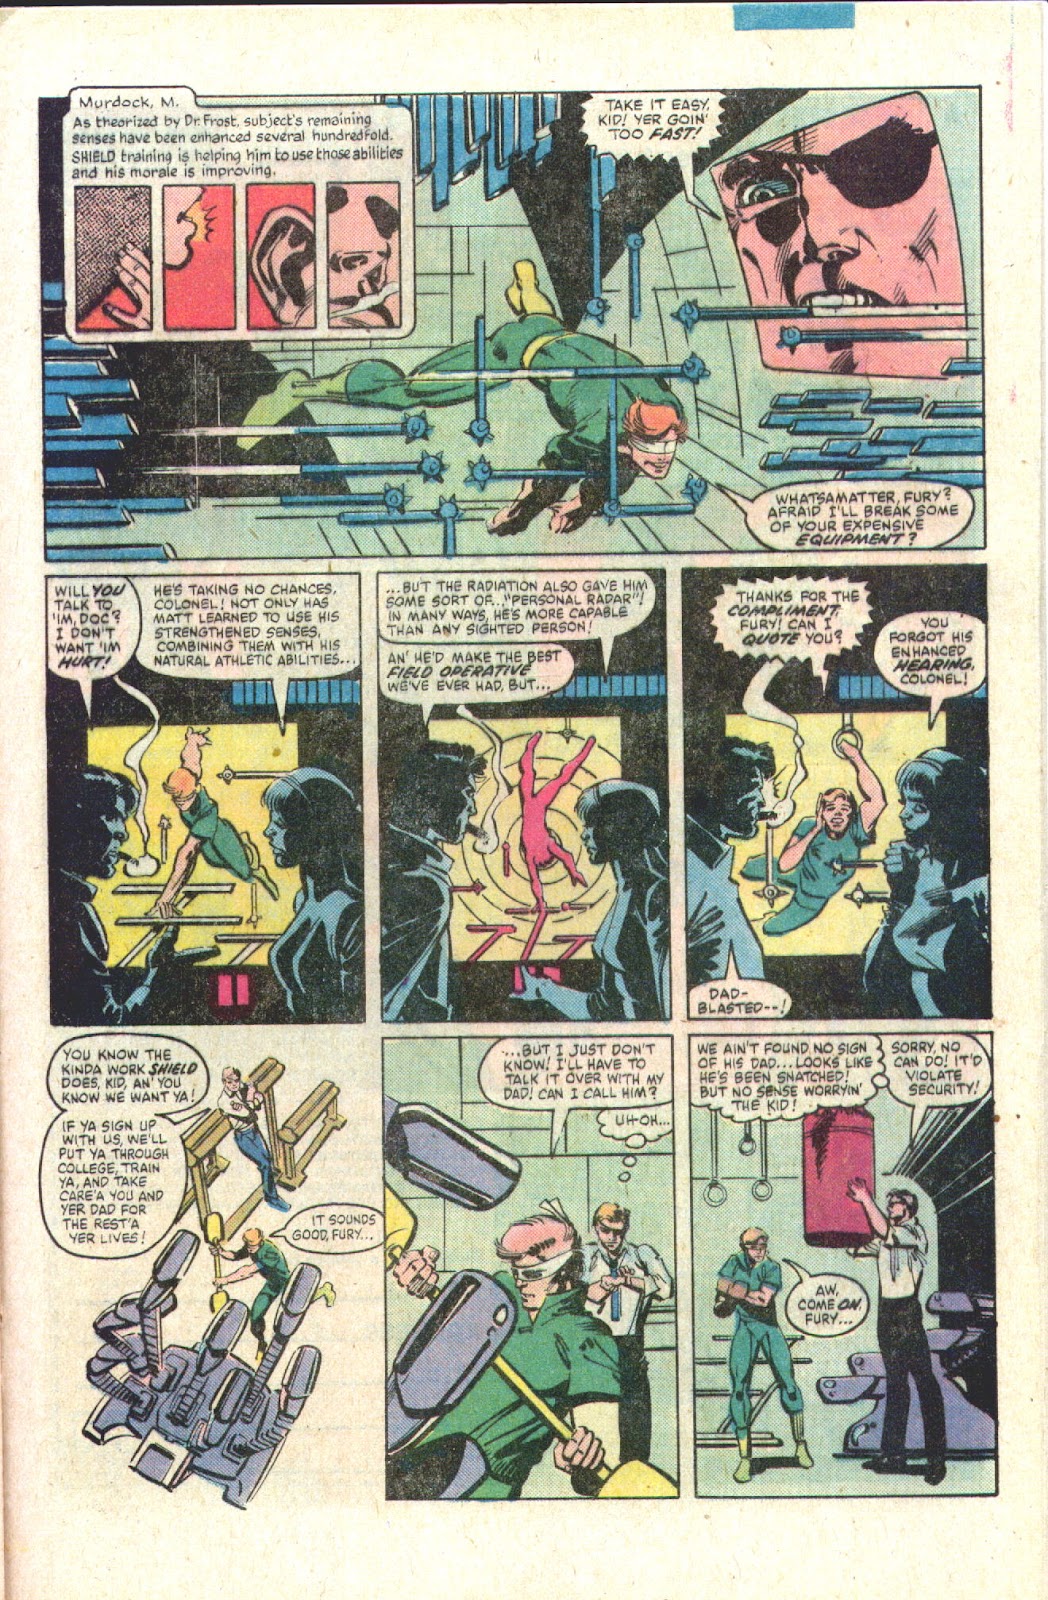 What If? (1977) issue 28 - Daredevil became an agent of SHIELD - Page 32